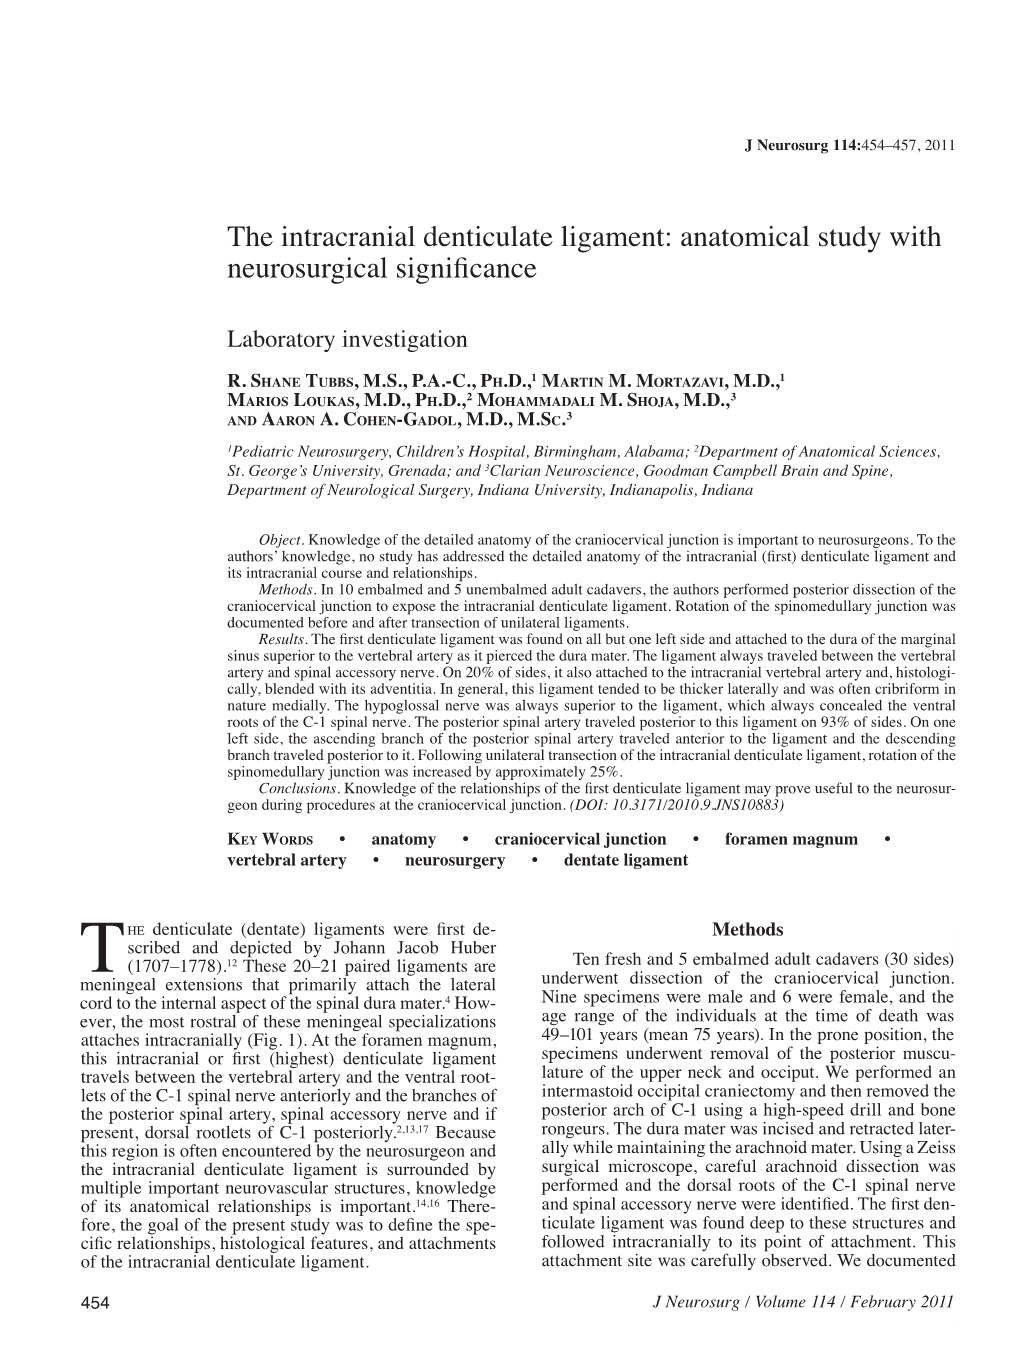 The Intracranial Denticulate Ligament: Anatomical Study with Neurosurgical Significance